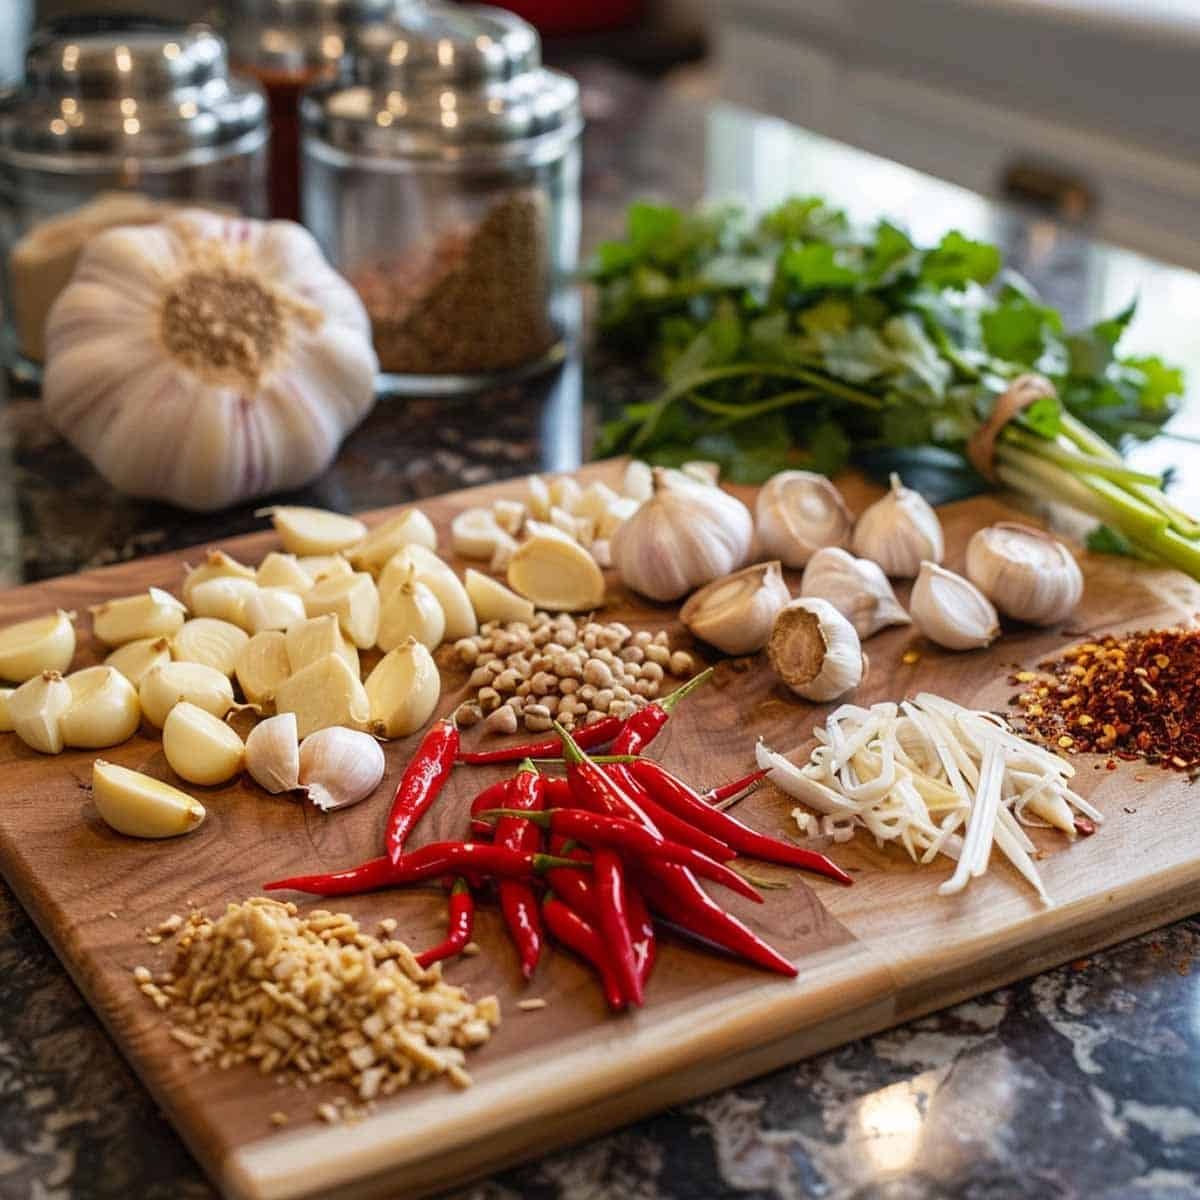 Ingredients for Panang curry: red chili peppers, garlic, ginger, lemongrass, kaffir lime leaves, and coconut milk on a cutting board